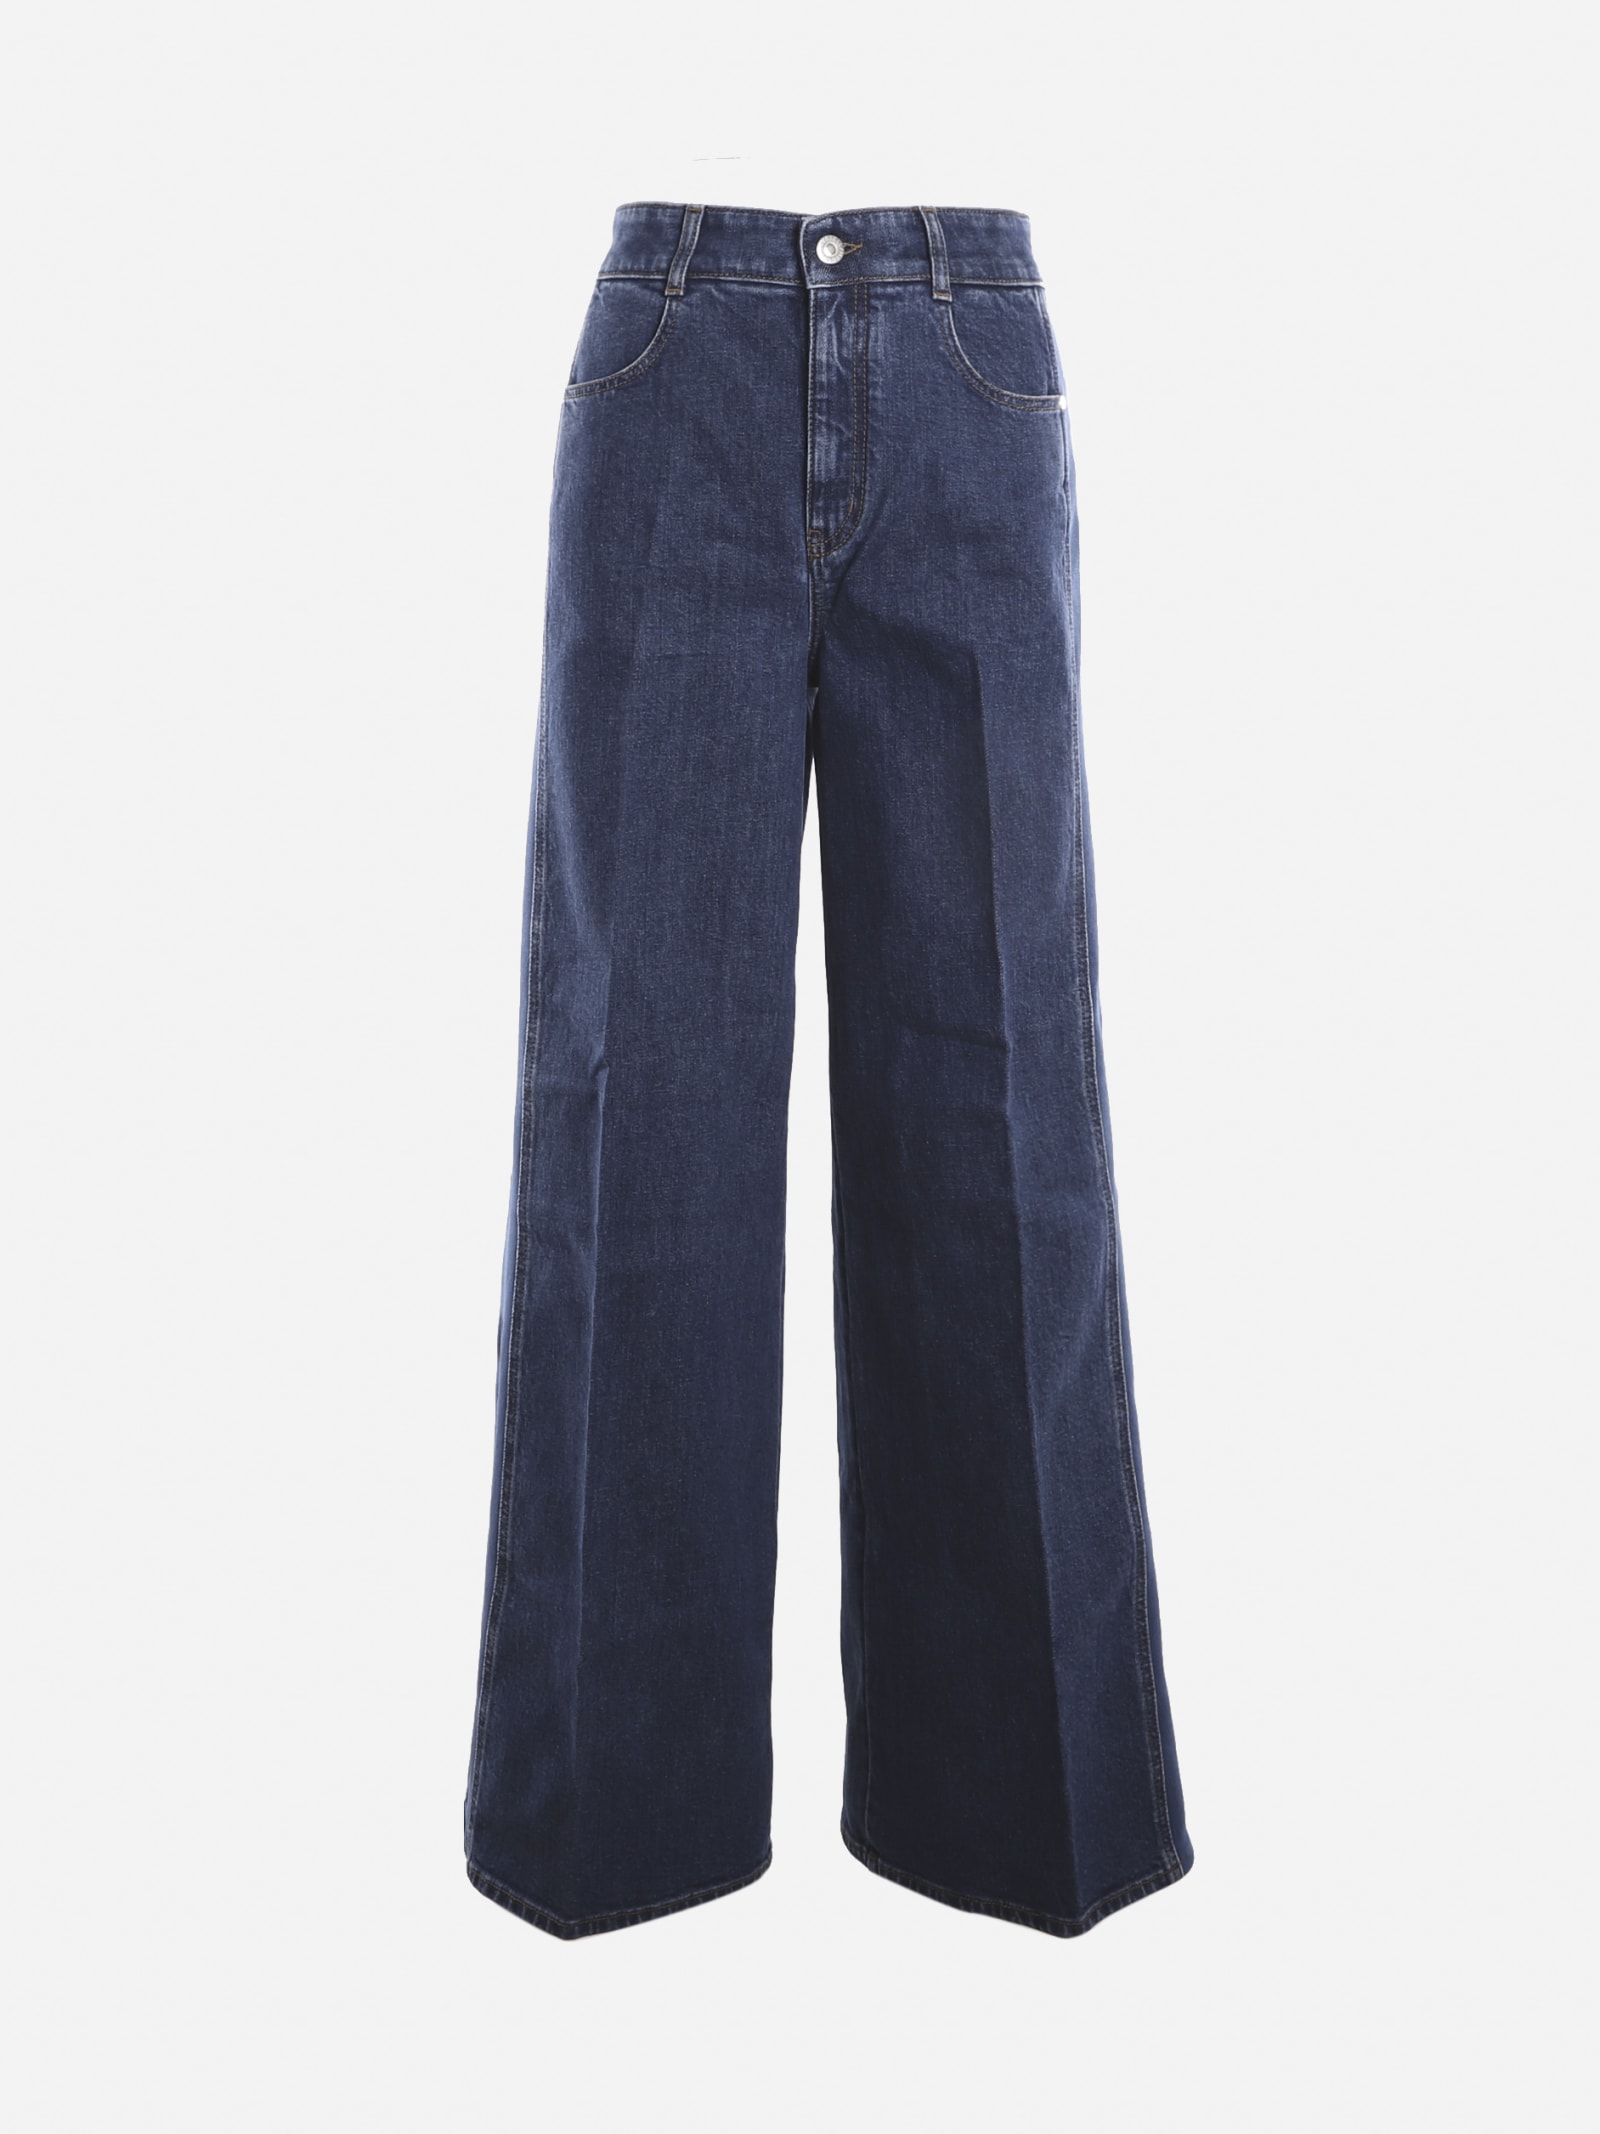 Stella McCartney Flare Jeans In Cotton Denim With Side Logo Band